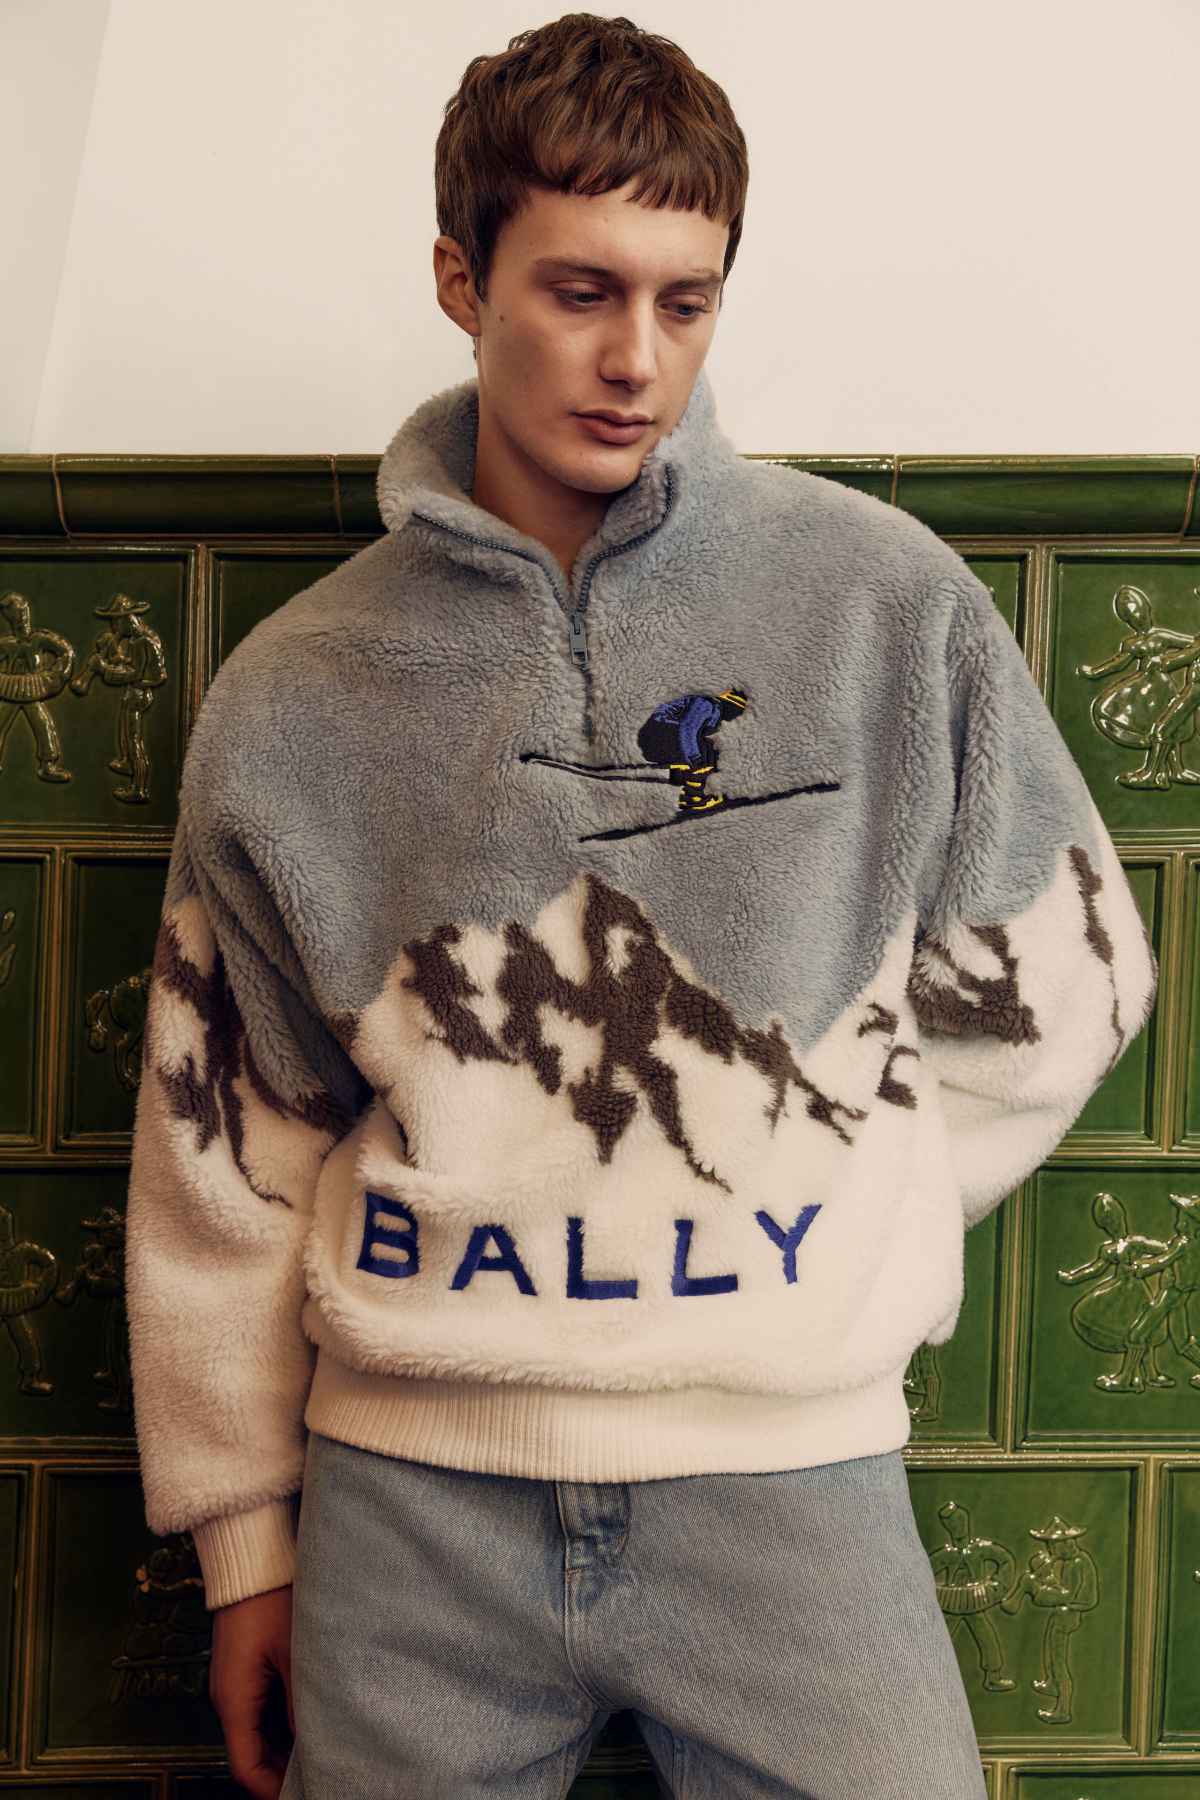 The Bally Winter Capsule Pays Tribute To The Mountain Landscape